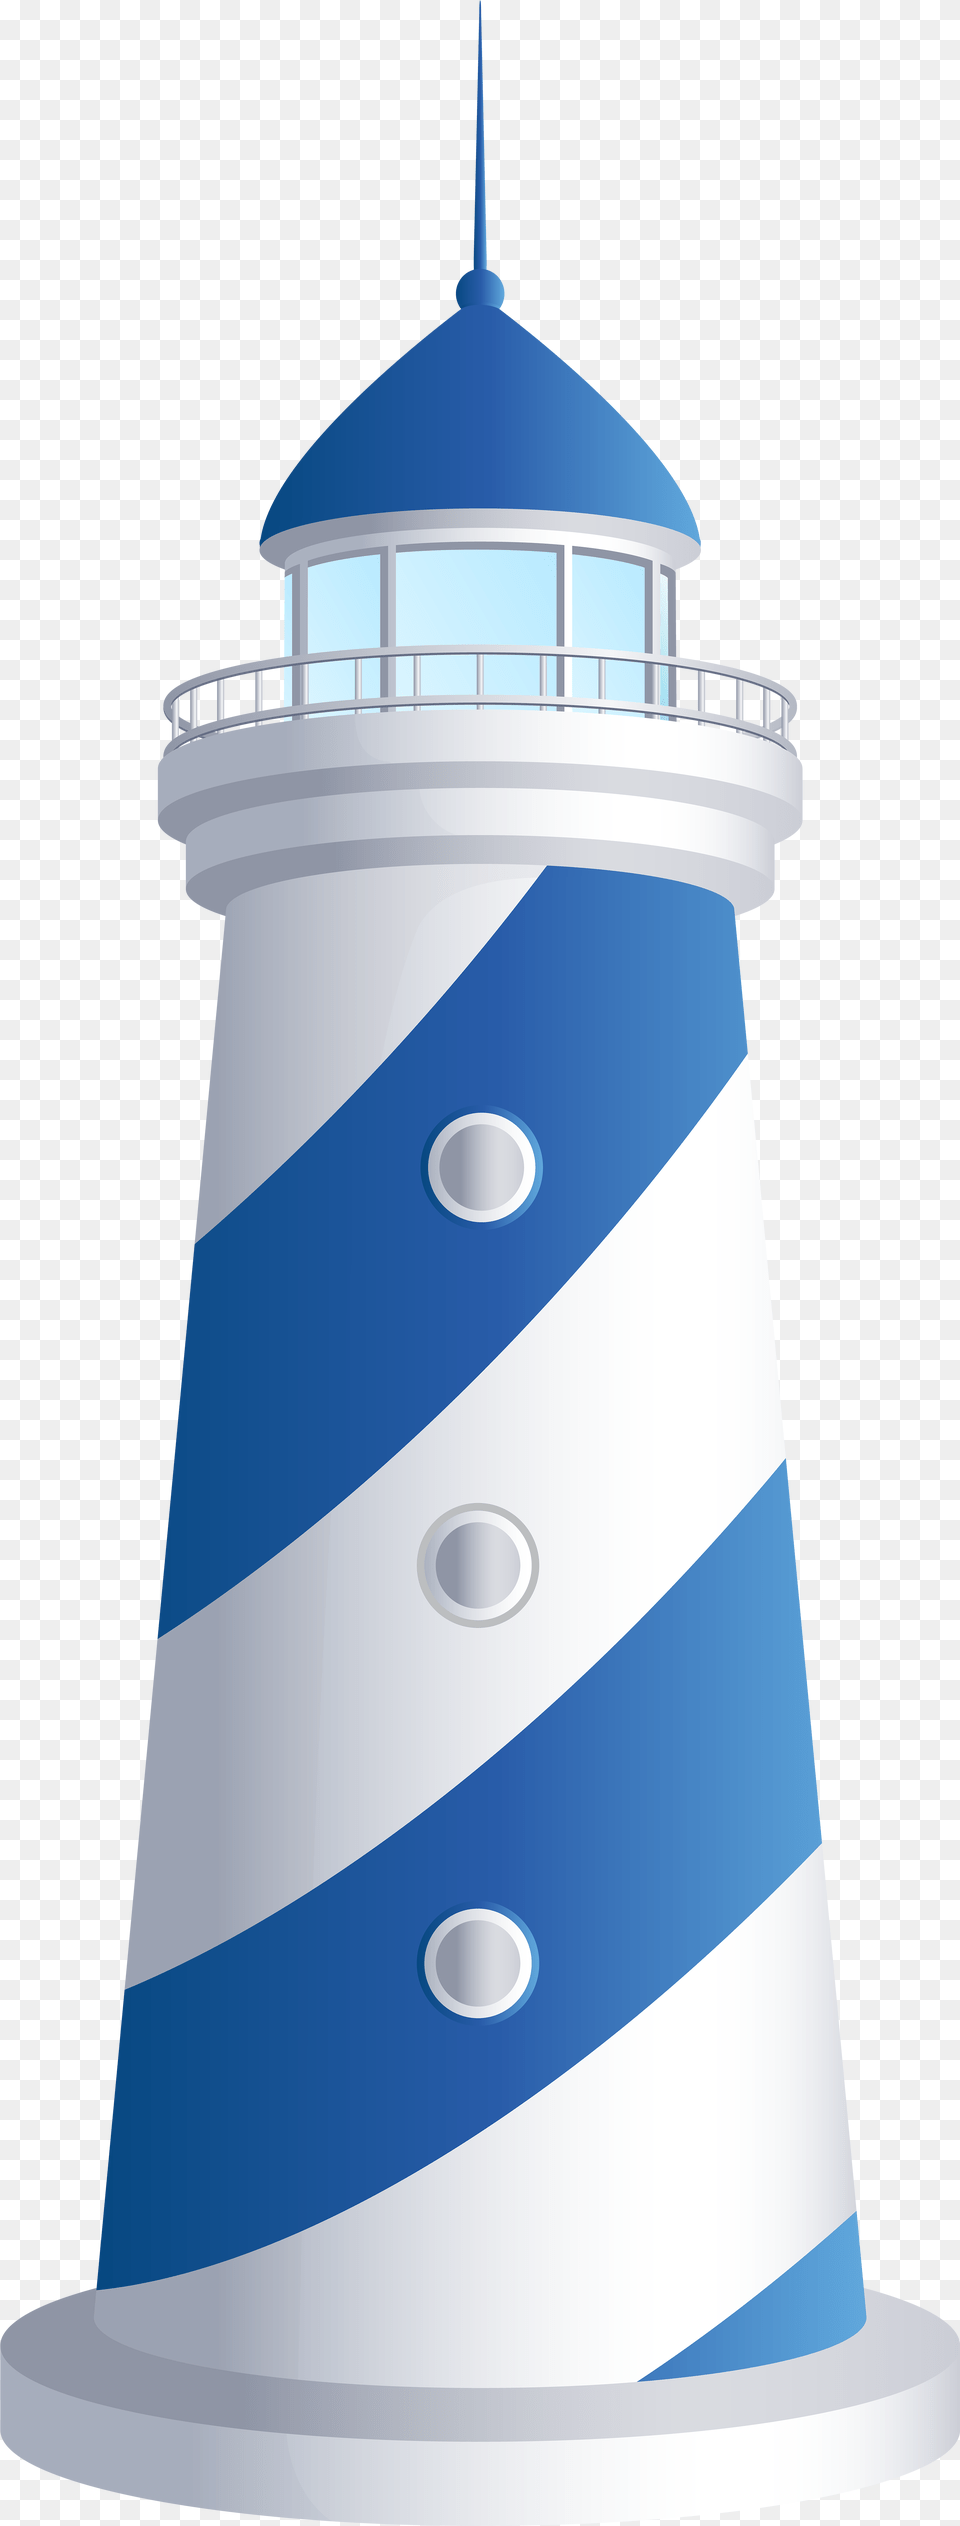 Lighthouse Transparent Clip Art Image Cartoon Lighthouse White And Blue, Architecture, Beacon, Building, Tower Free Png